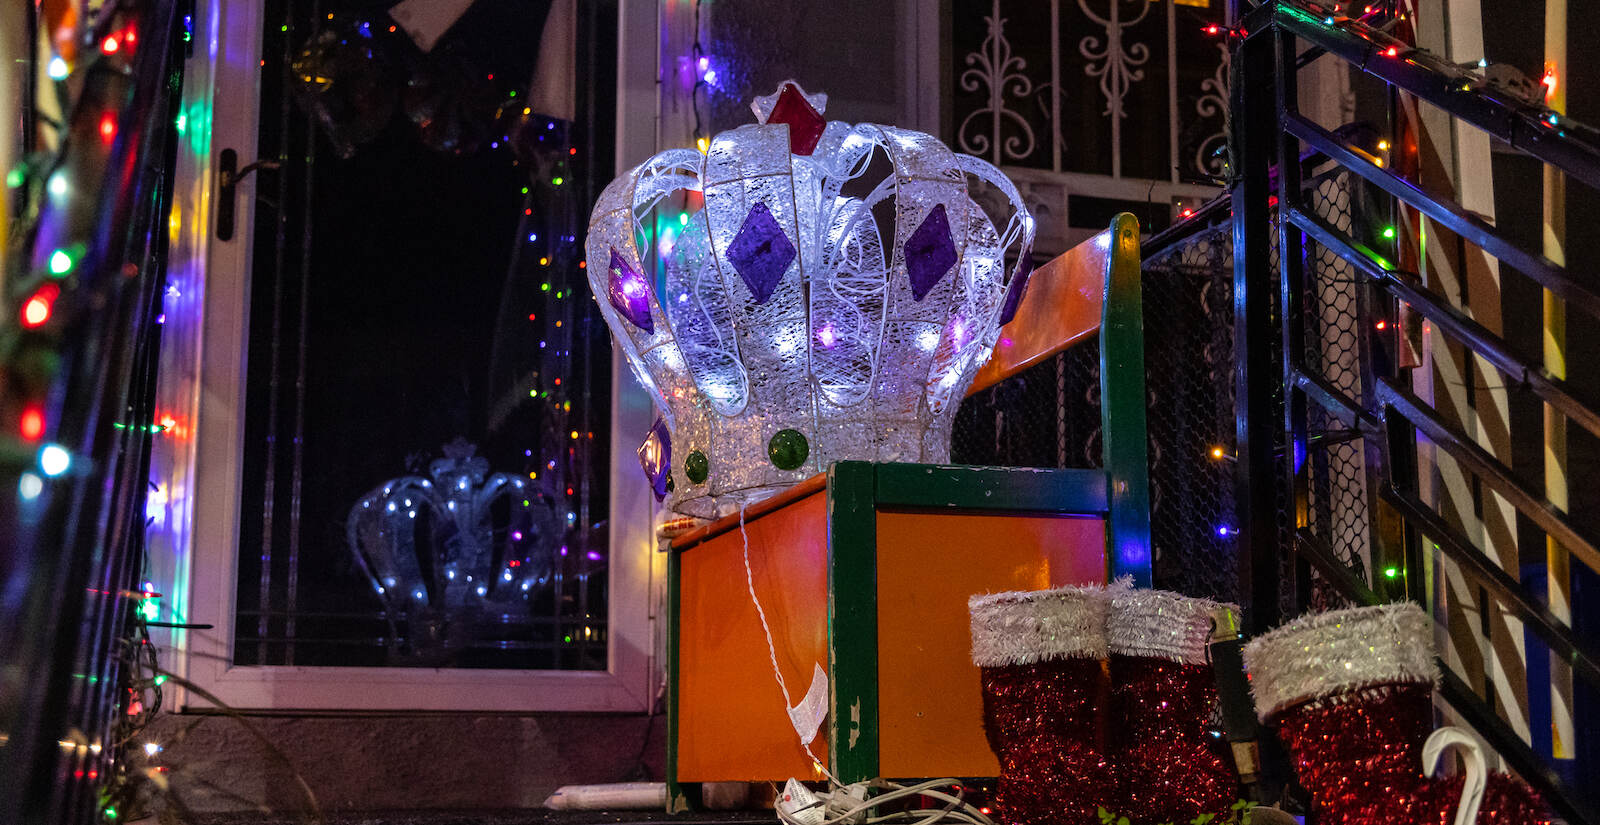 A decadent crown is part of an elaborate scene on a porch in Southwest Philadelphia.